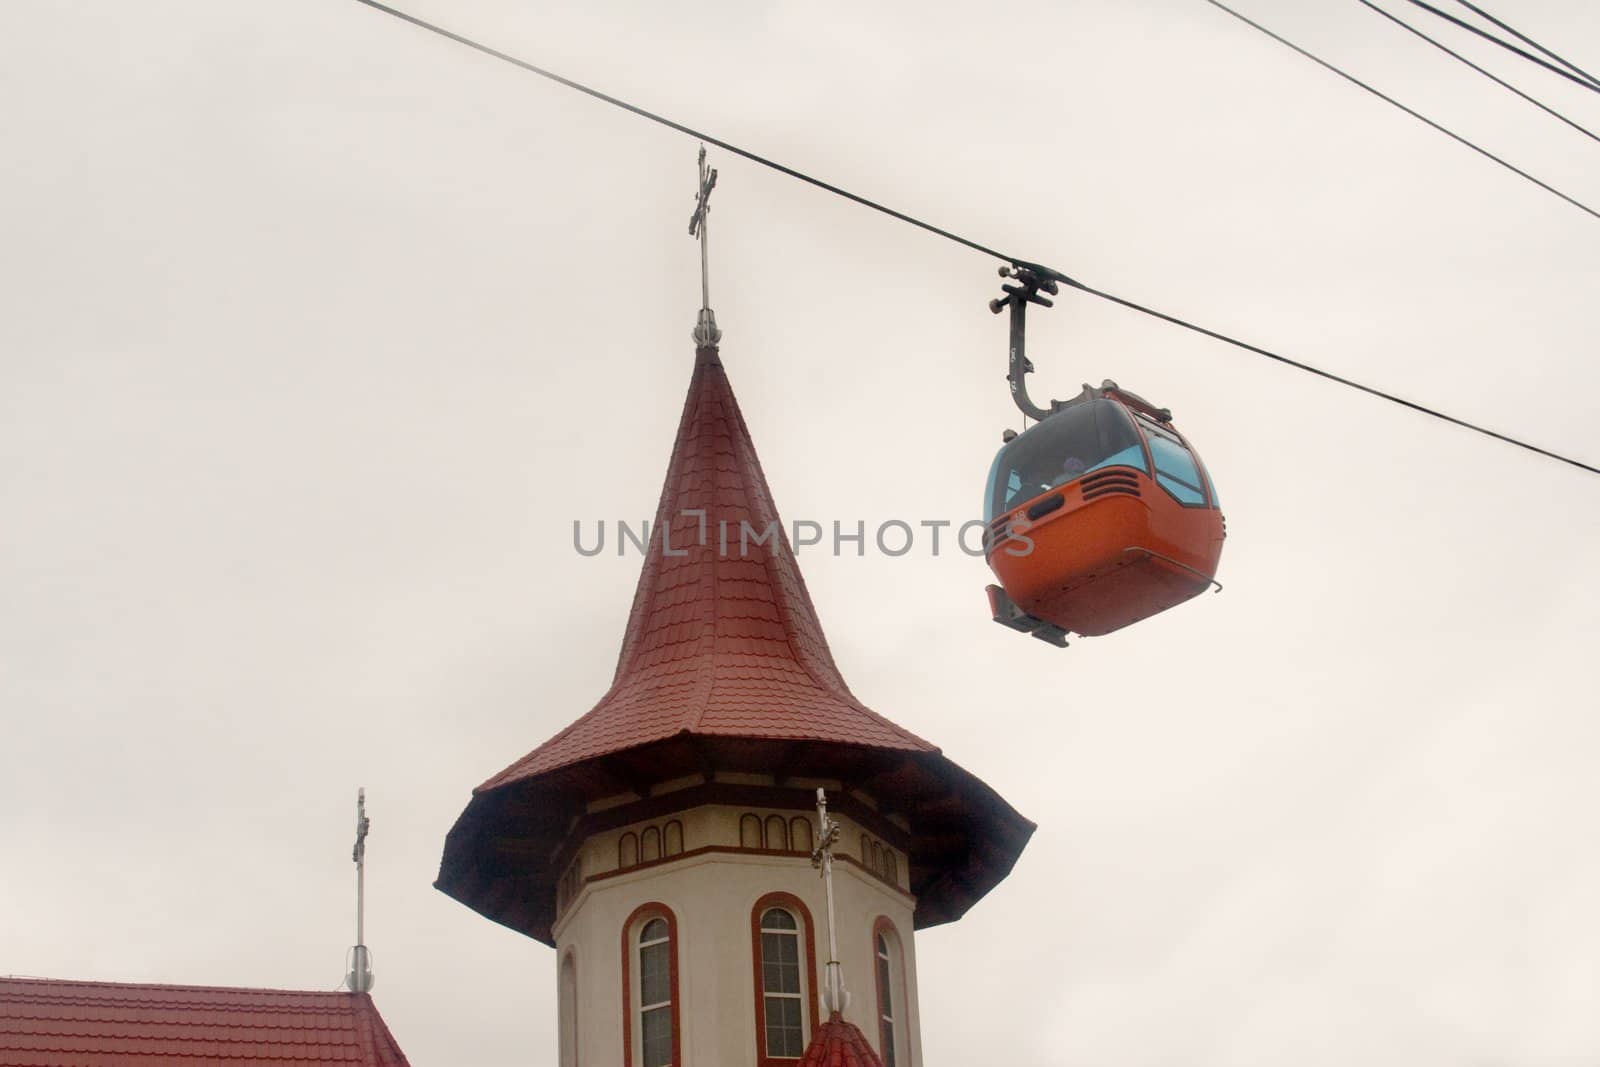 Ski gondola traveling low and past the top of a church